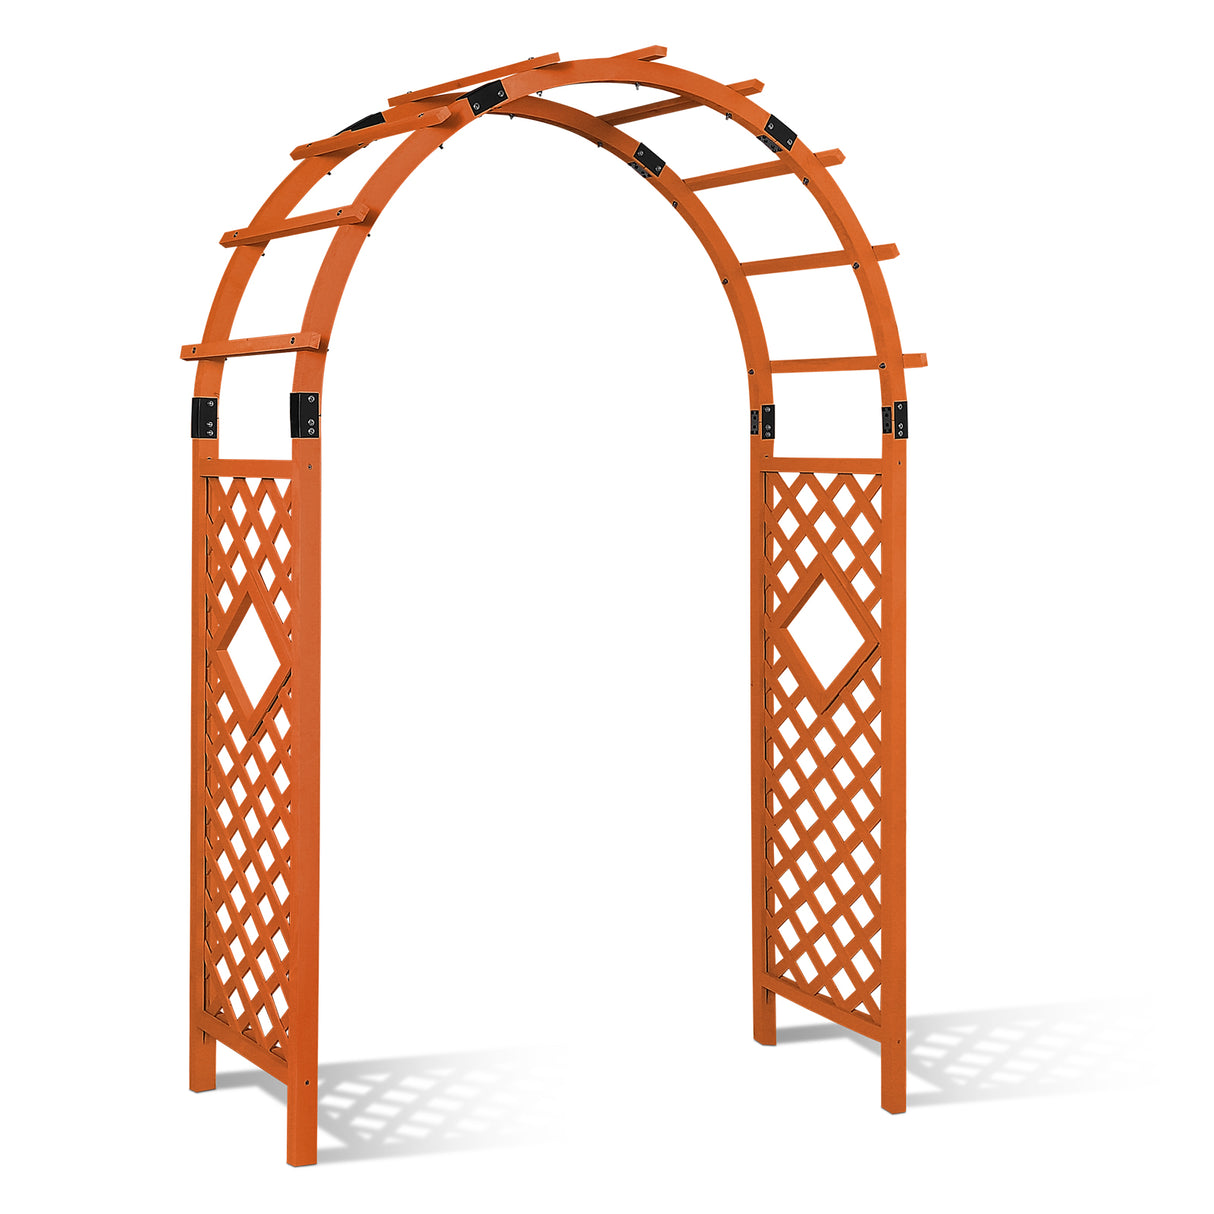 EAGLE PEAK Wood Arbor Garden Trellis Archway, Wedding Arch for Ceremony, Outdoor Wooden Pergola for Climbing Plant, 92 in